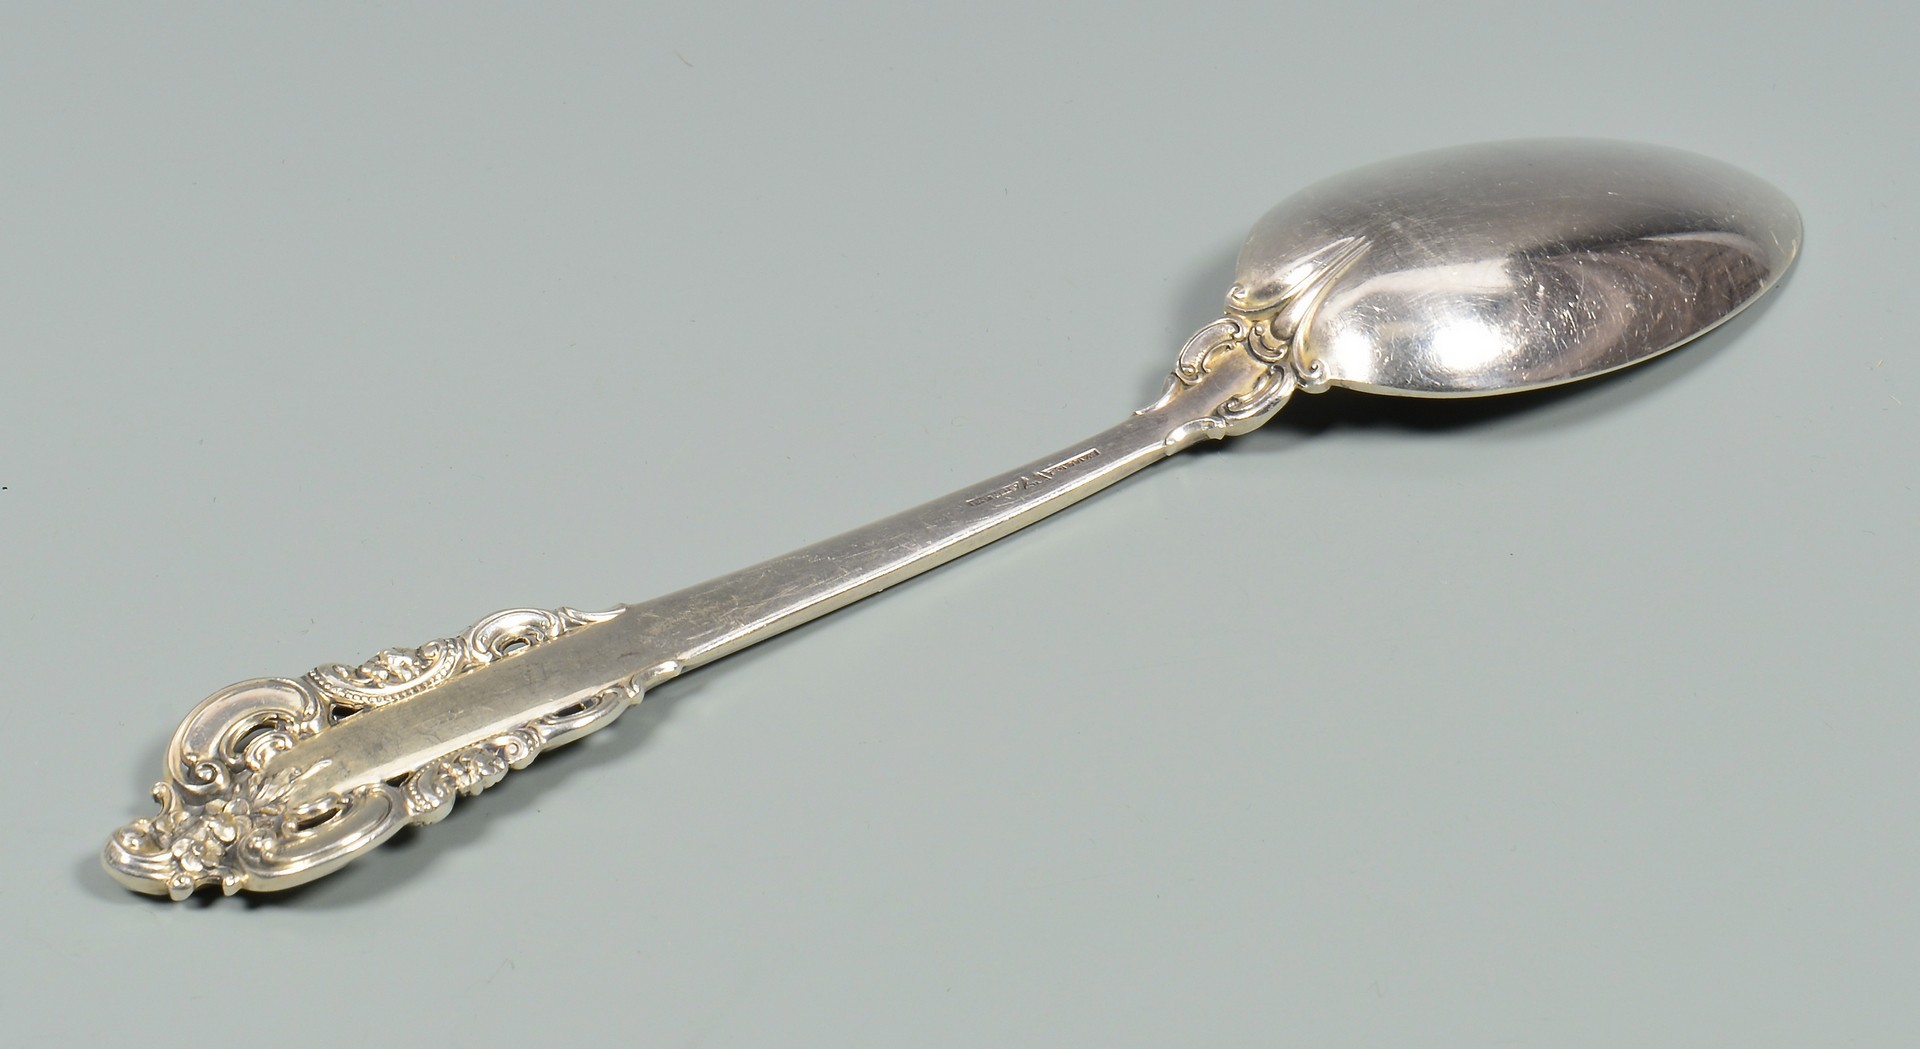 Lot 41: Grand Baroque Sterling Flatware, 143 pieces